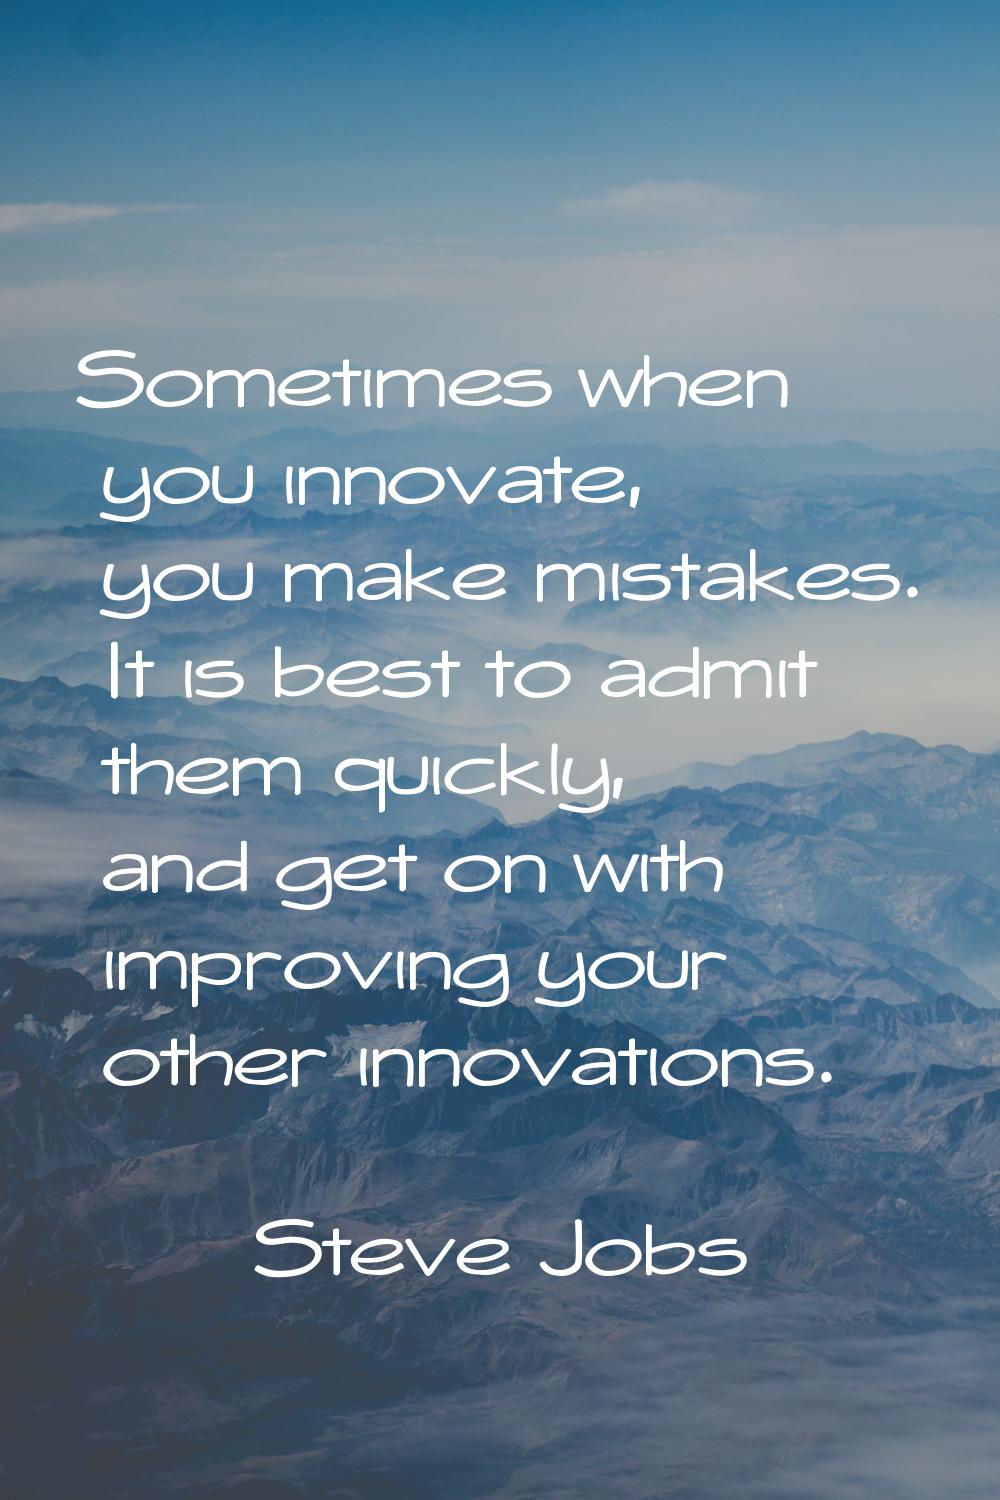 Sometimes when you innovate, you make mistakes. It is best to admit them quickly, and get on with i